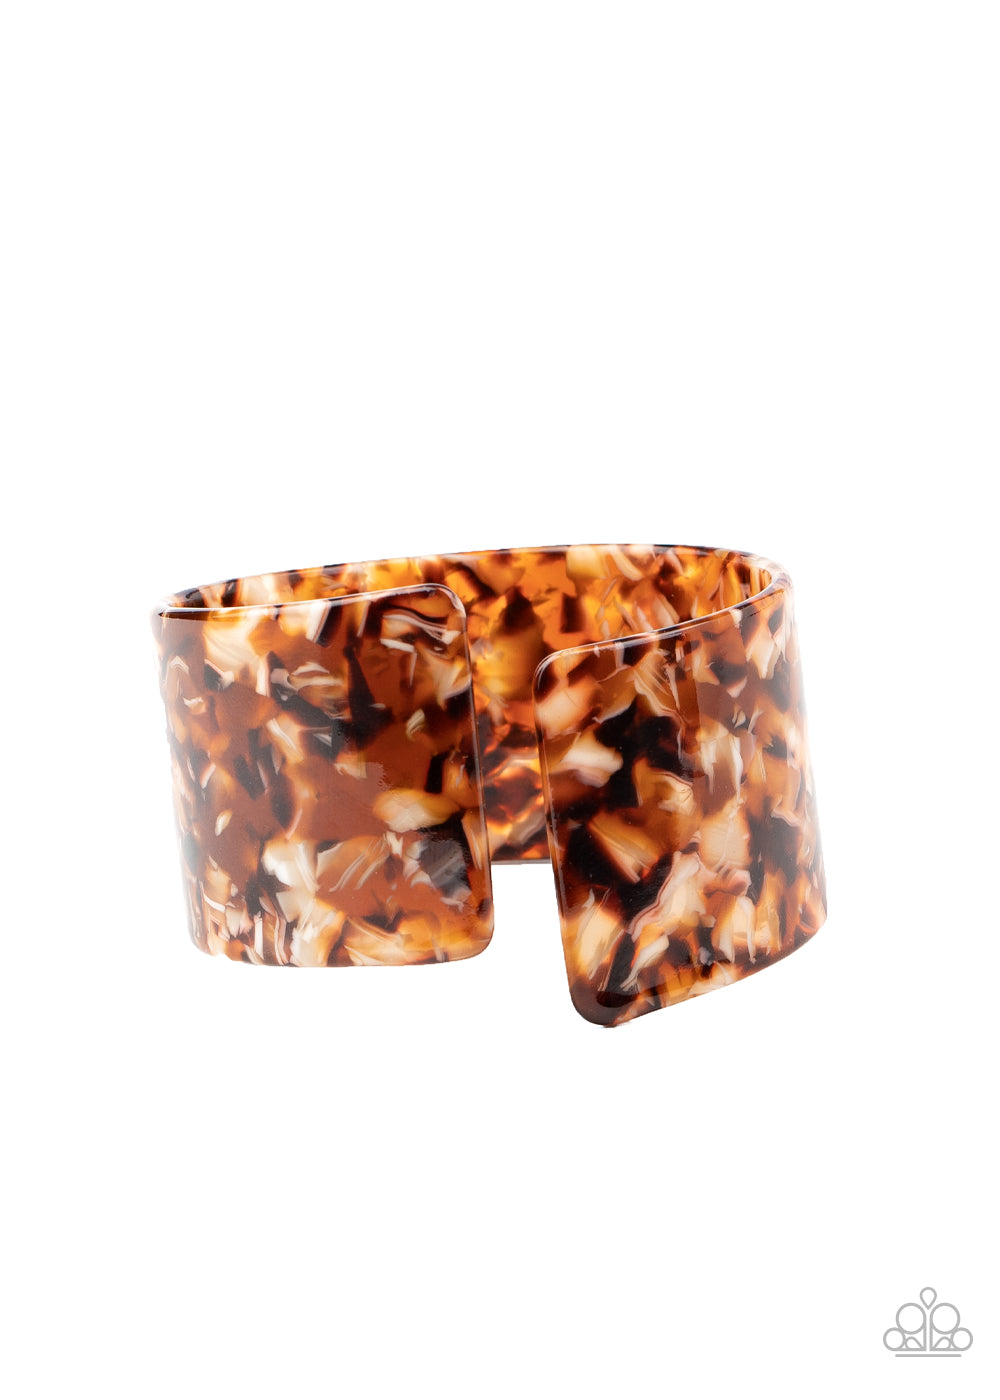 &lt;P&gt;Featuring a colorful tortoise shell pattern, a brown acrylic cuff asymmetrically wraps around the wrist, creating a tilted opening for a retro finish.&lt;/P&gt;

&lt;P&gt;&lt;I&gt; Sold as one individual bracelet.&lt;/I&gt;&lt;/p&gt;

&lt;img src=\&quot;https://d9b54x484lq62.cloudfront.net/paparazzi/shopping/images/517_tag150x115_1.png\&quot; alt=\&quot;New Kit\&quot; align=\&quot;middle\&quot; height=\&quot;50\&quot; width=\&quot;50\&quot;/&gt;